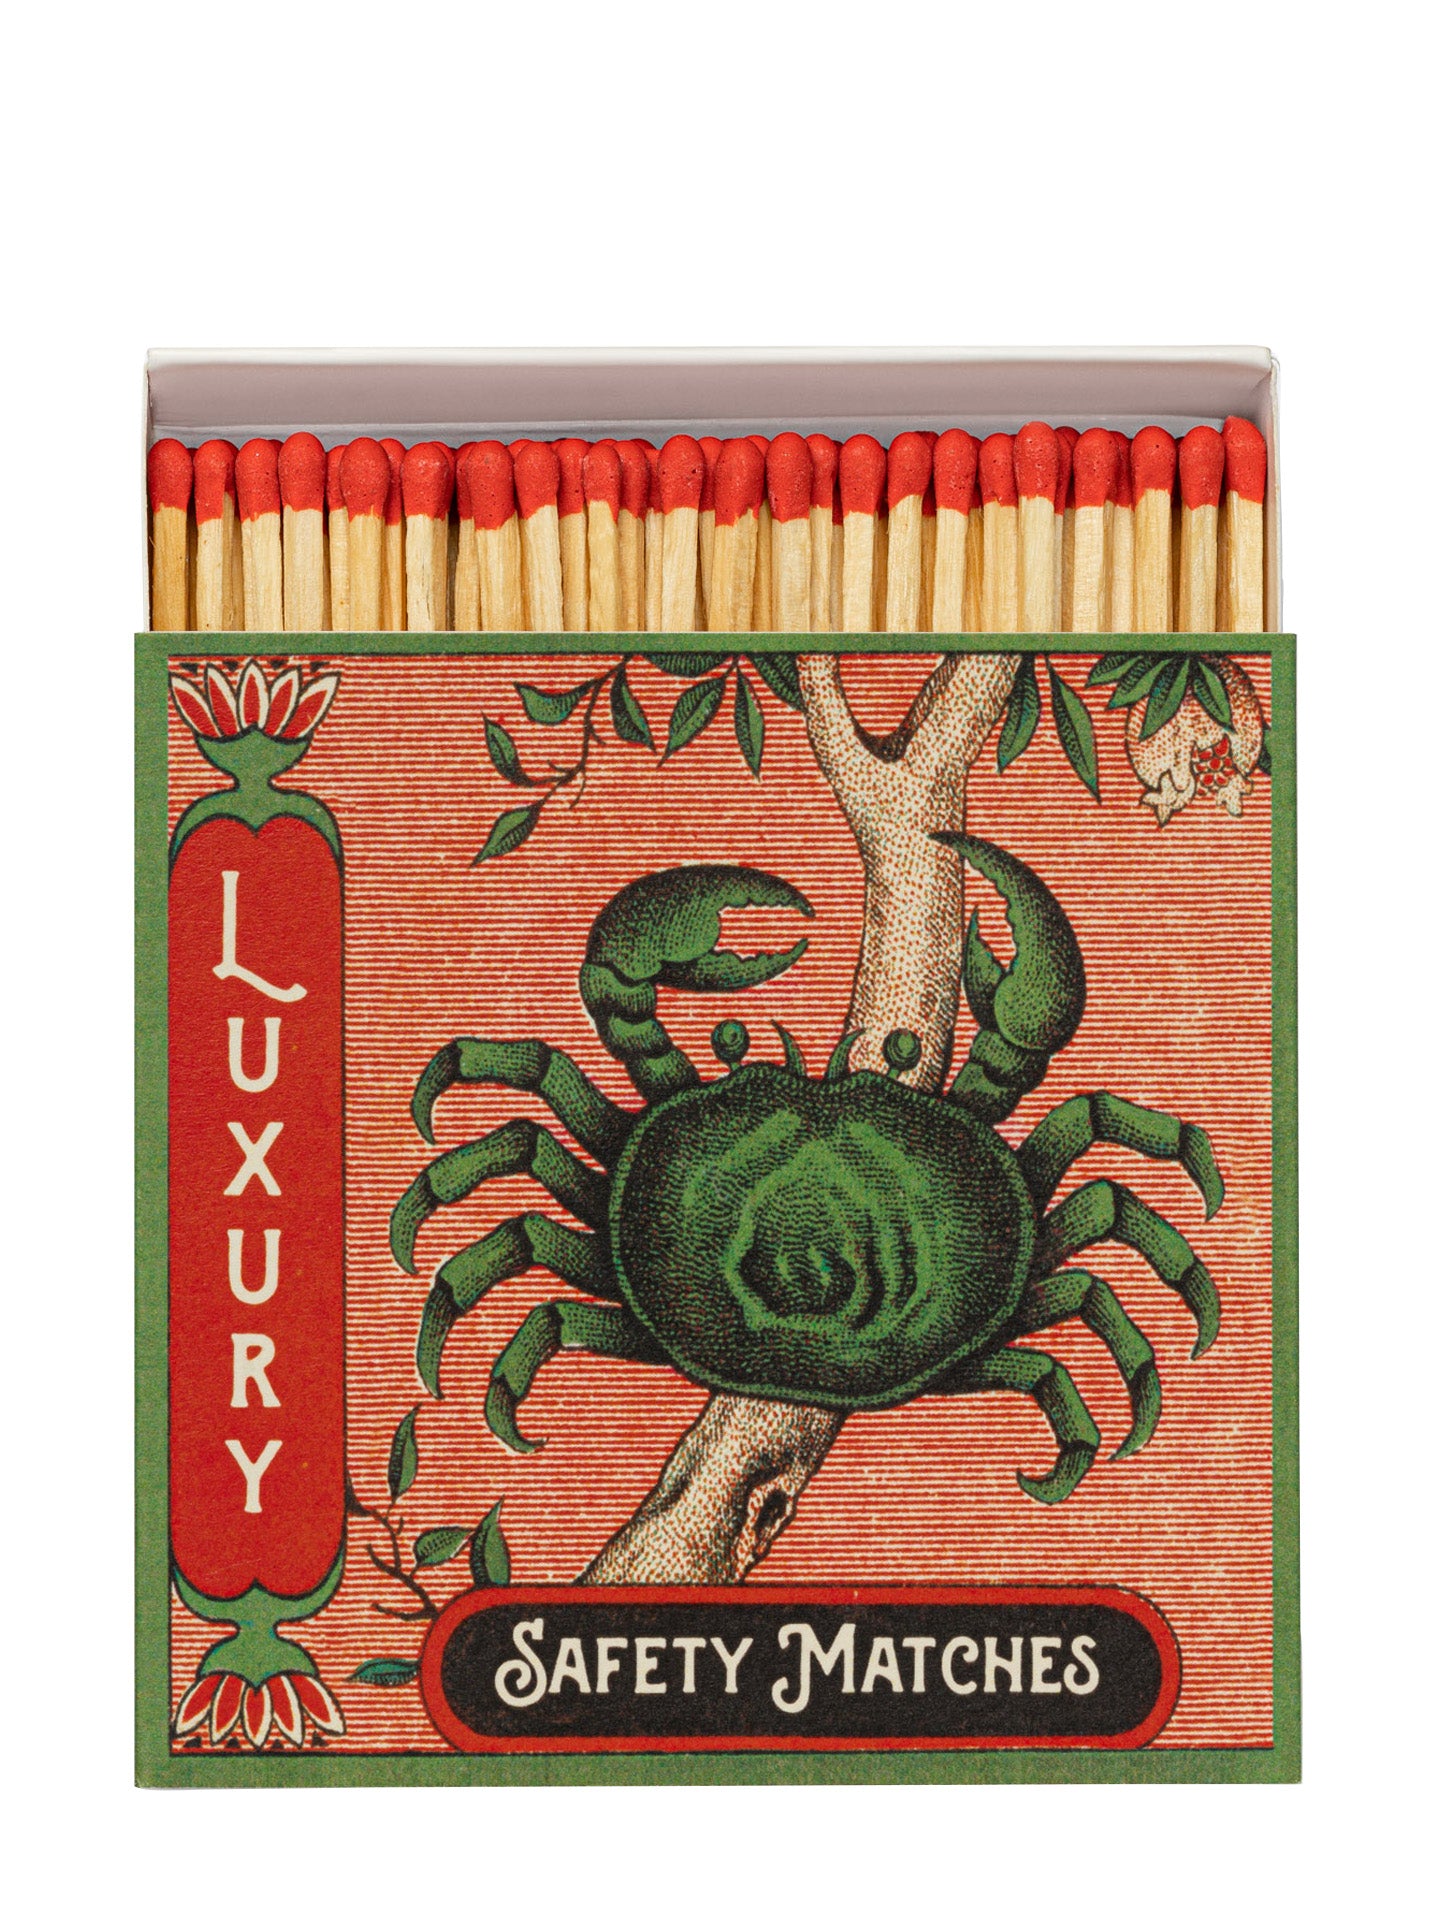 The Crab Safety Matches